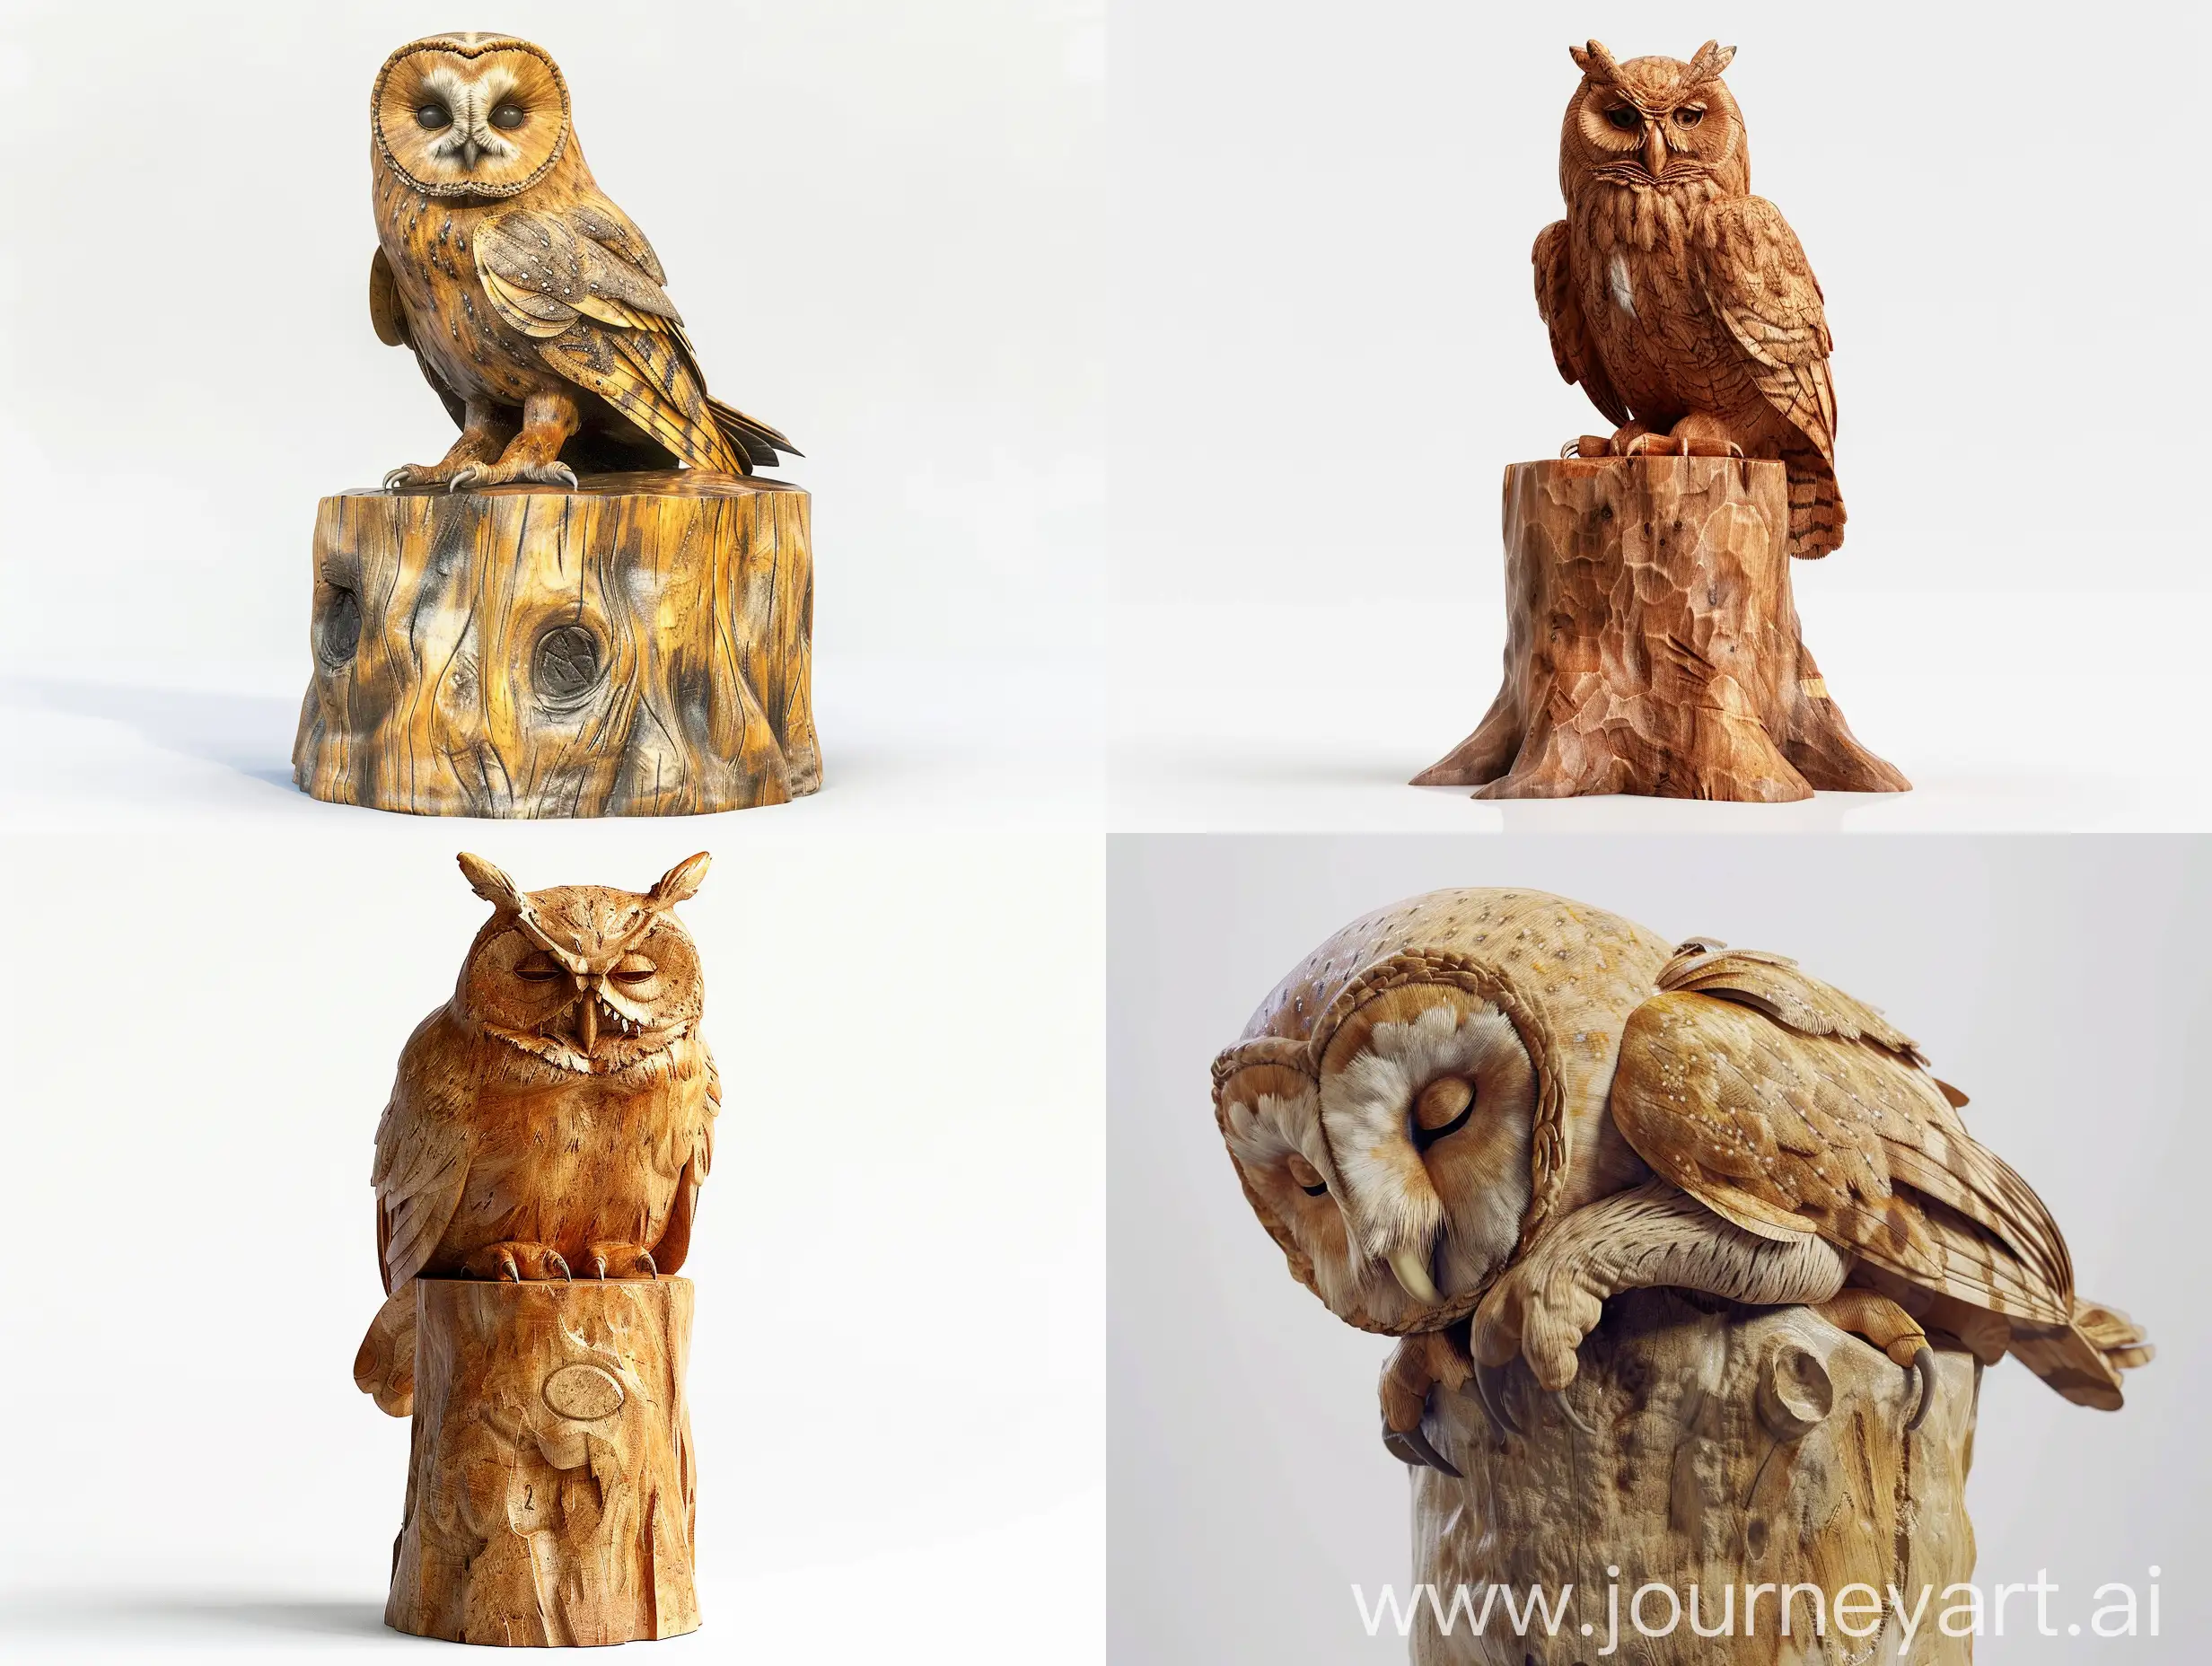 Realistic-Wooden-Owl-Sculpture-Resting-on-Cylinder-in-Full-Profile